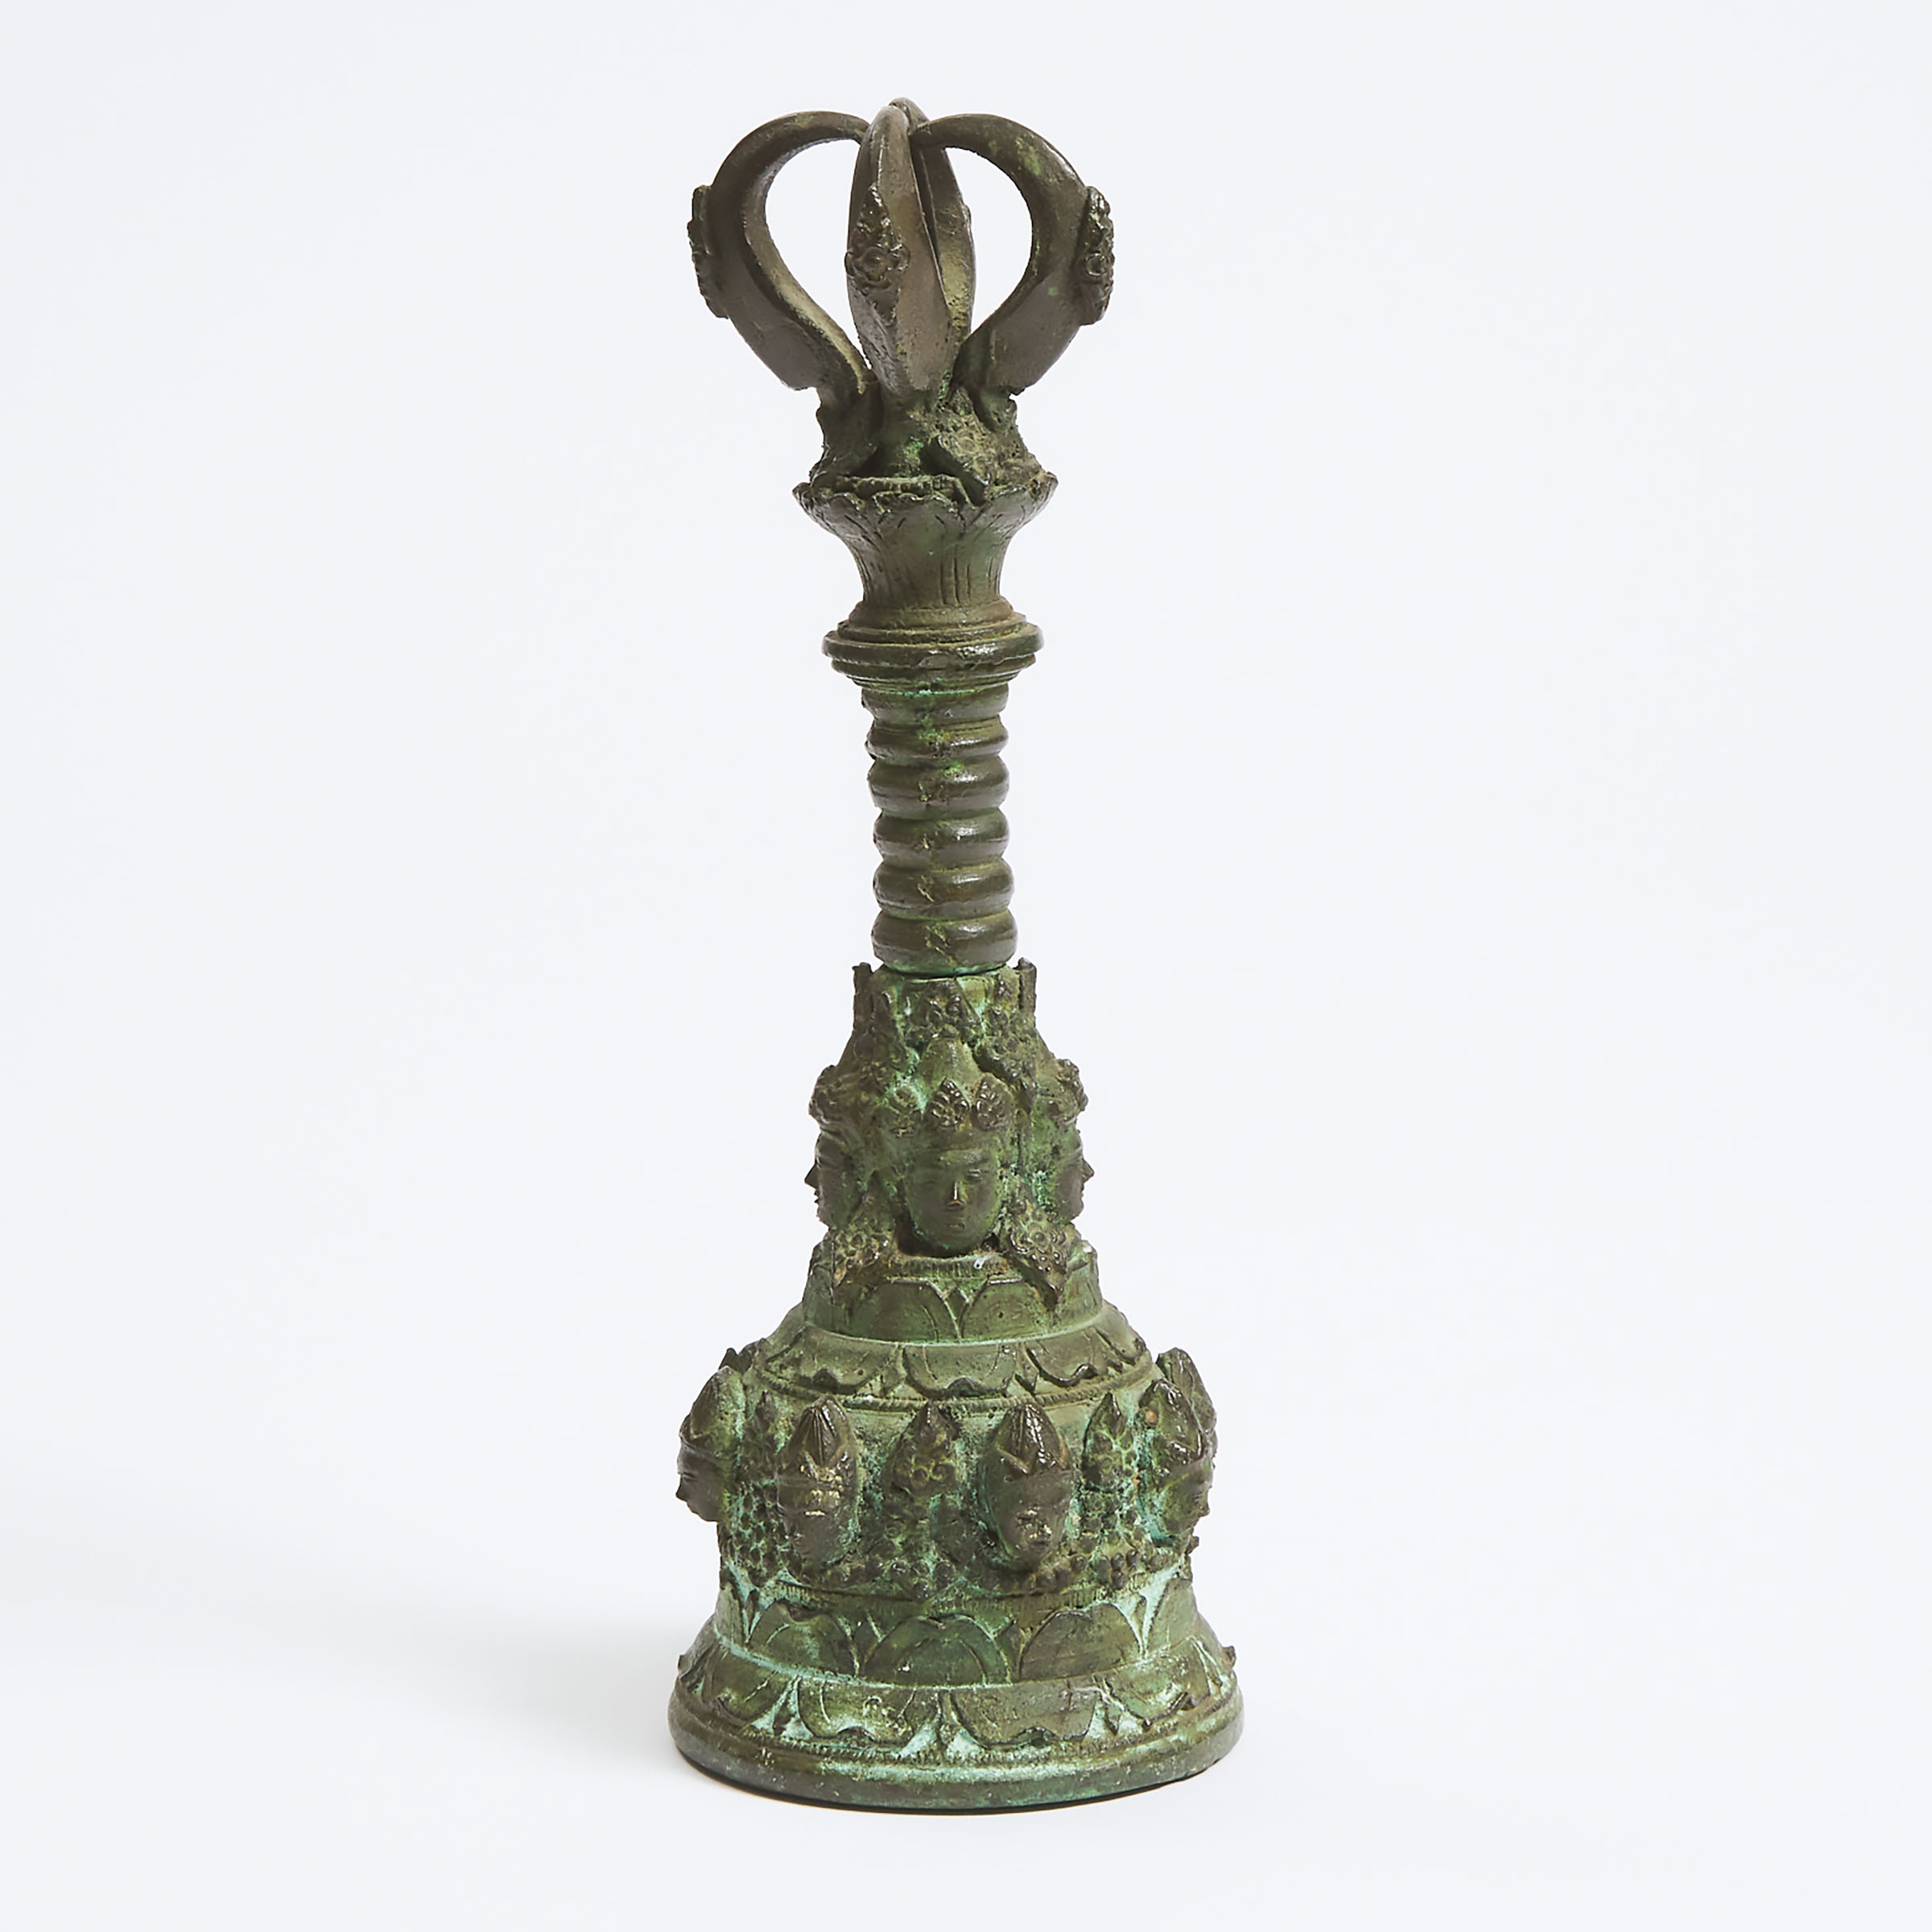 A Bronze Ritual Vajra Bell (Lontjeng), Java, 14th Century or Later